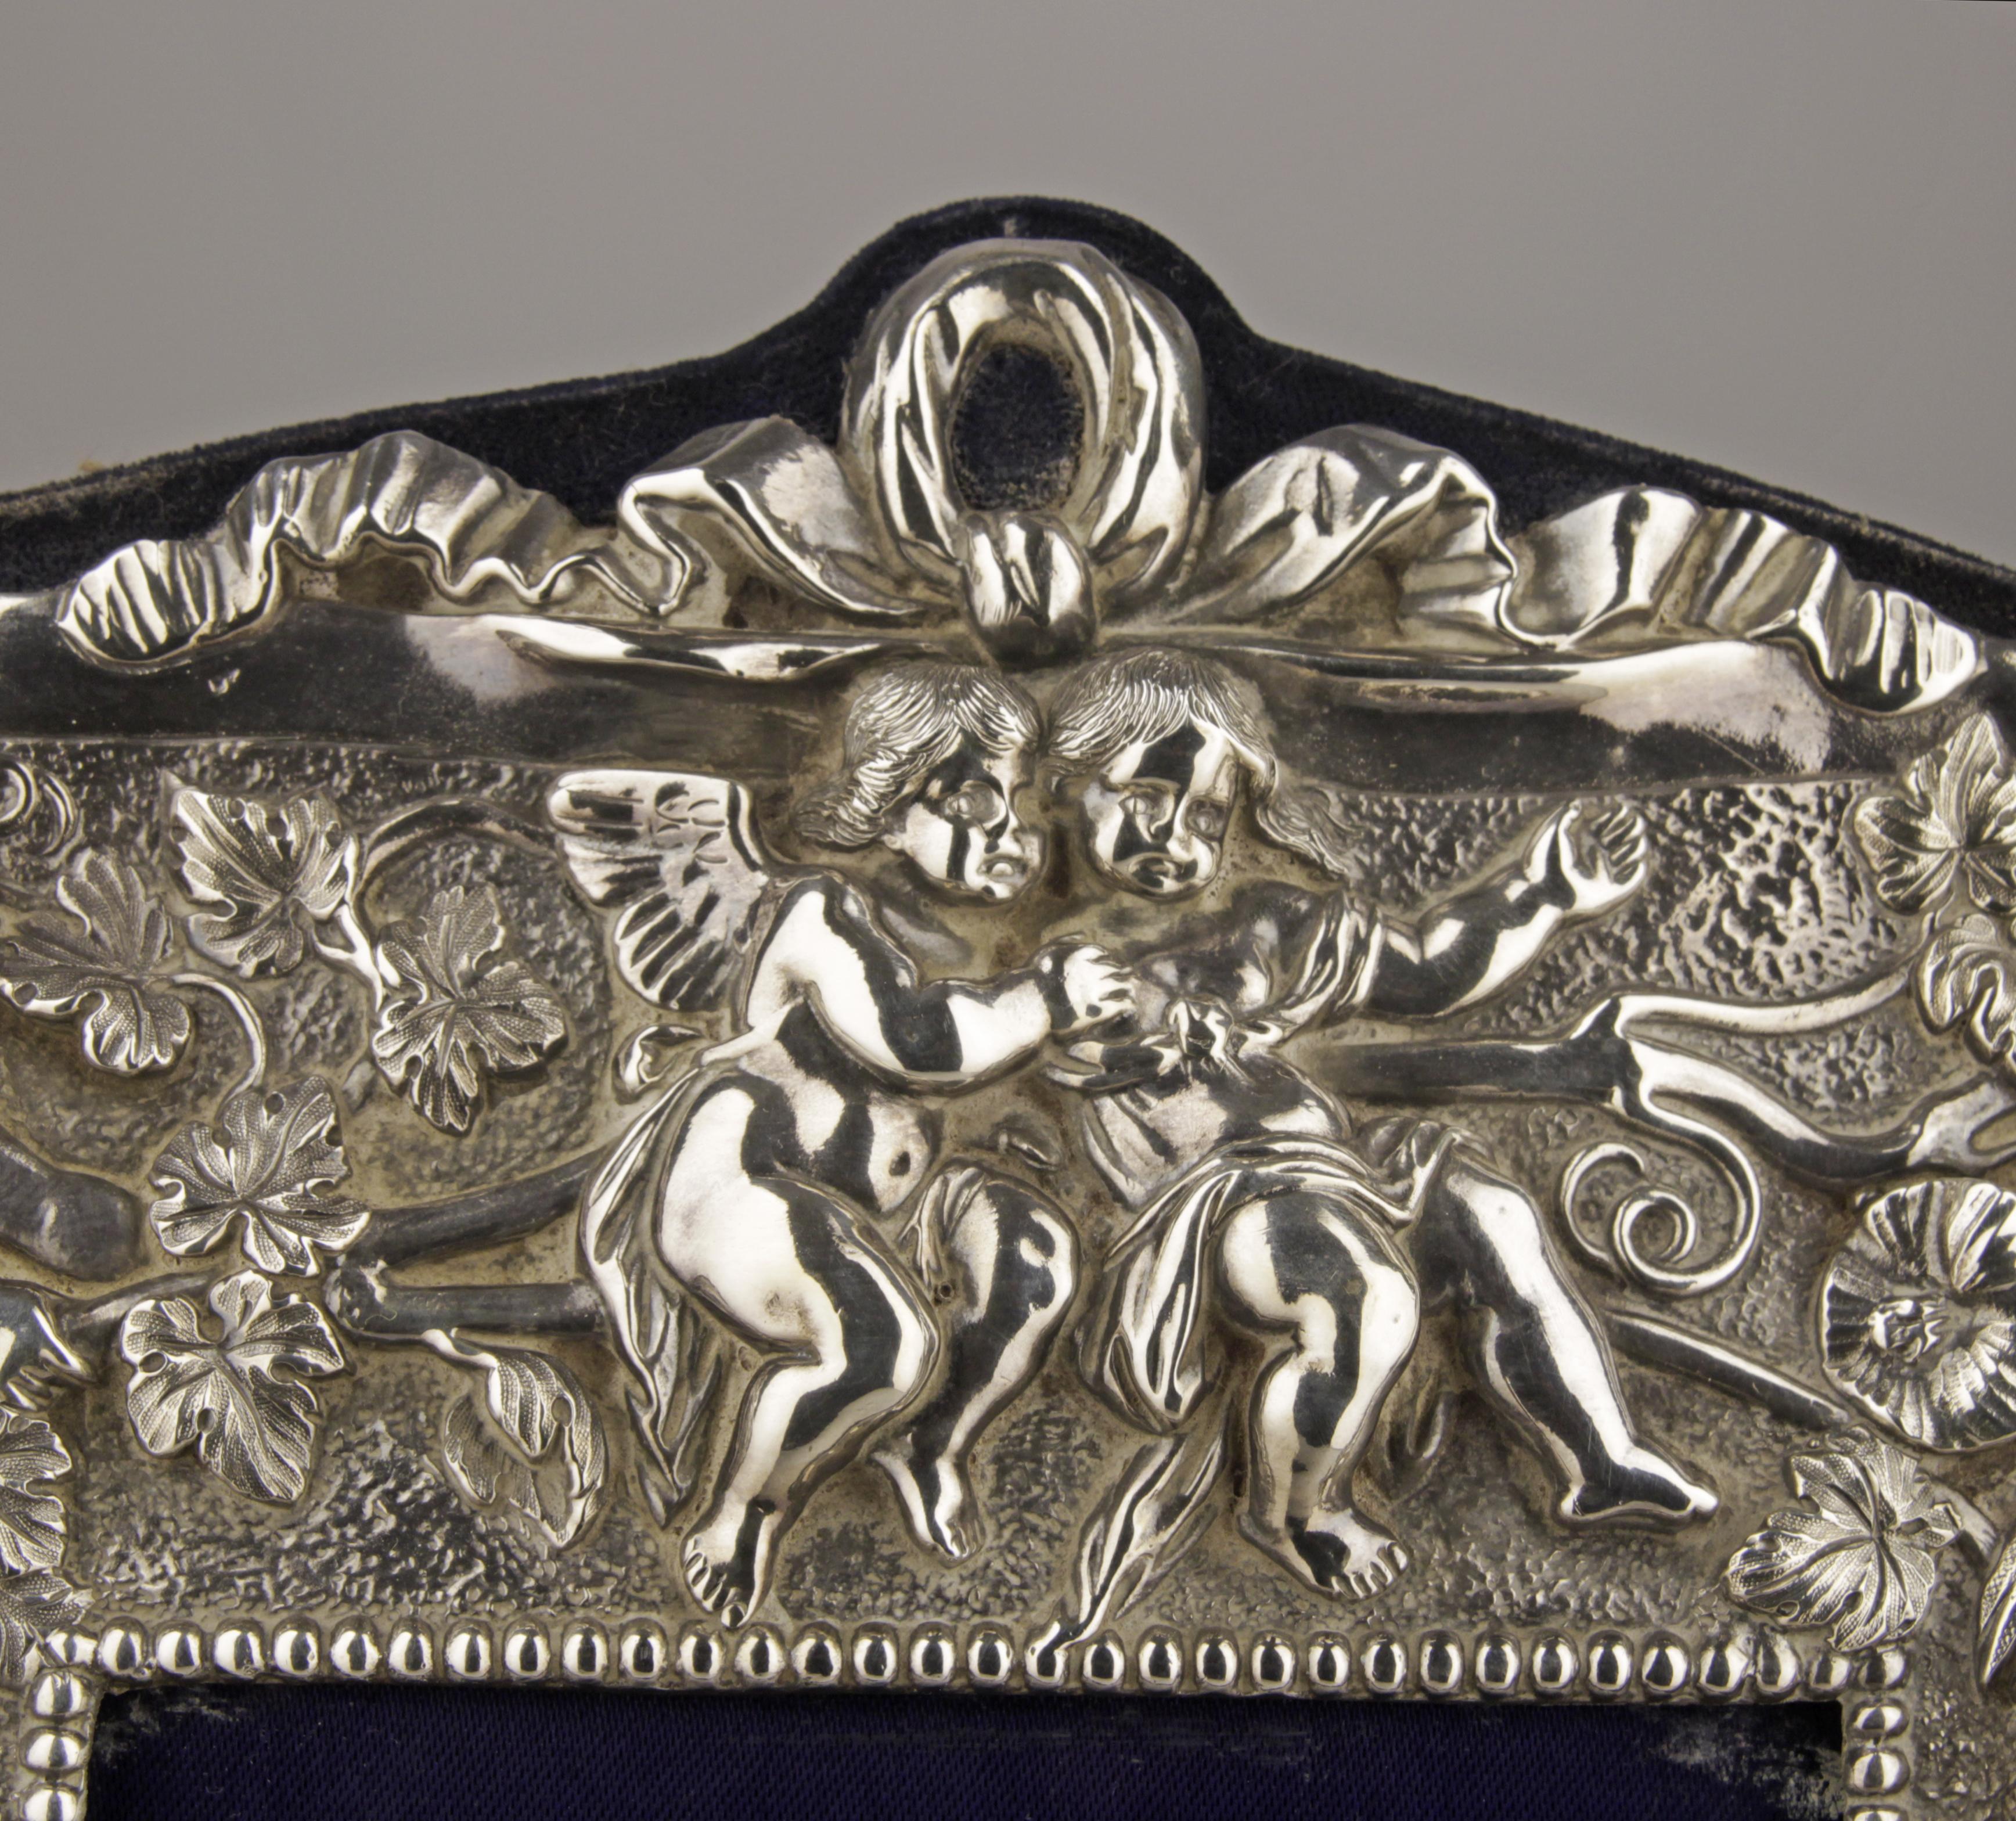 Repoussé Late 20th Century English Sterling Silver Frame with Cherubs and Plant Motifs